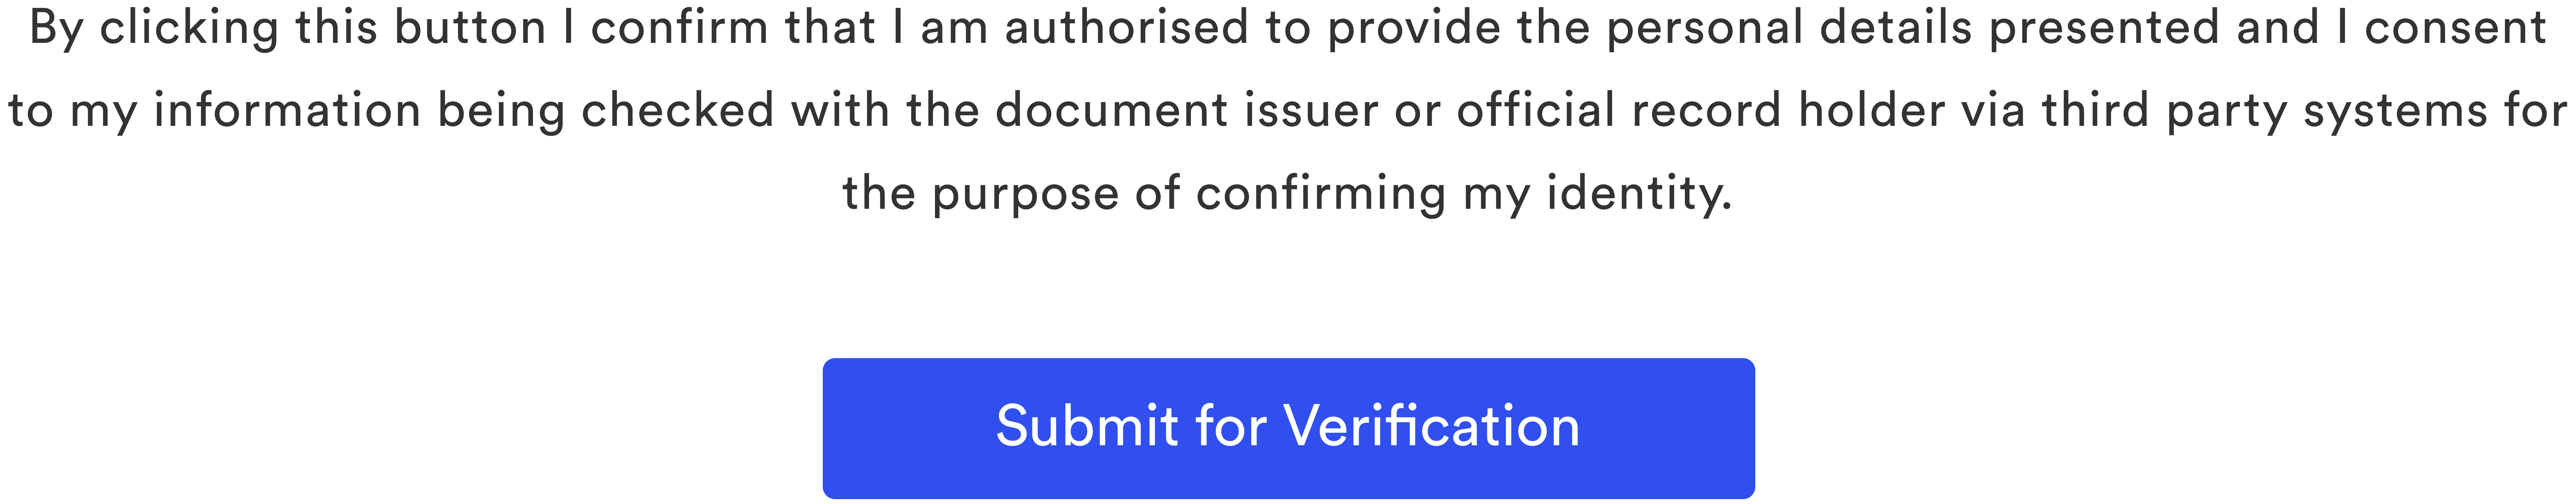 CoinSpot_Submit_for_Verification.png